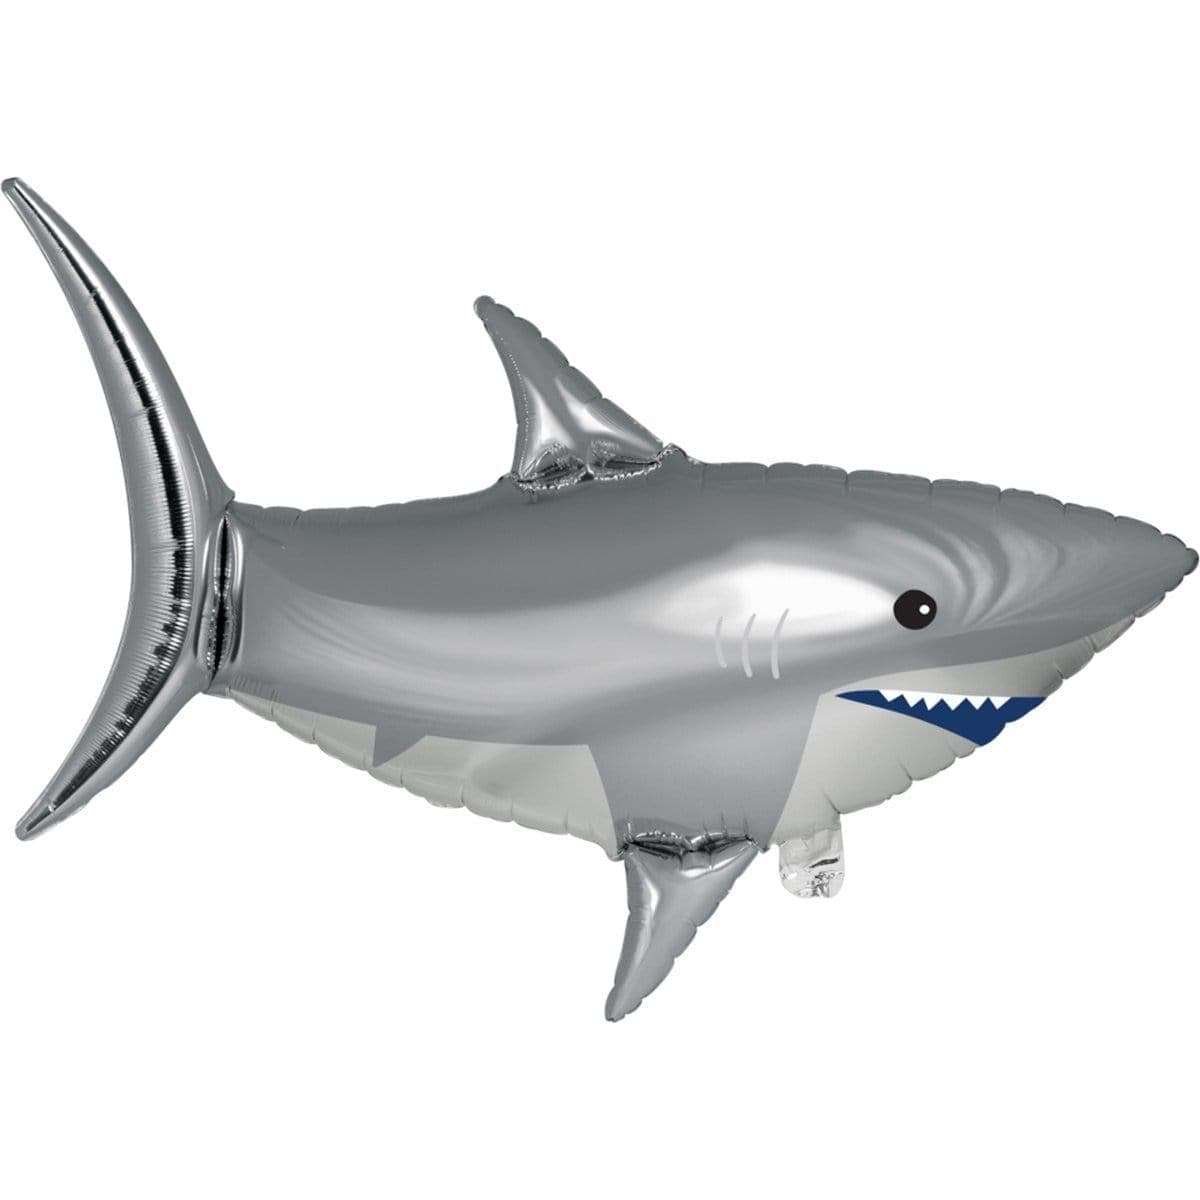 Buy Balloons Shark Party Supershape Balloon sold at Party Expert